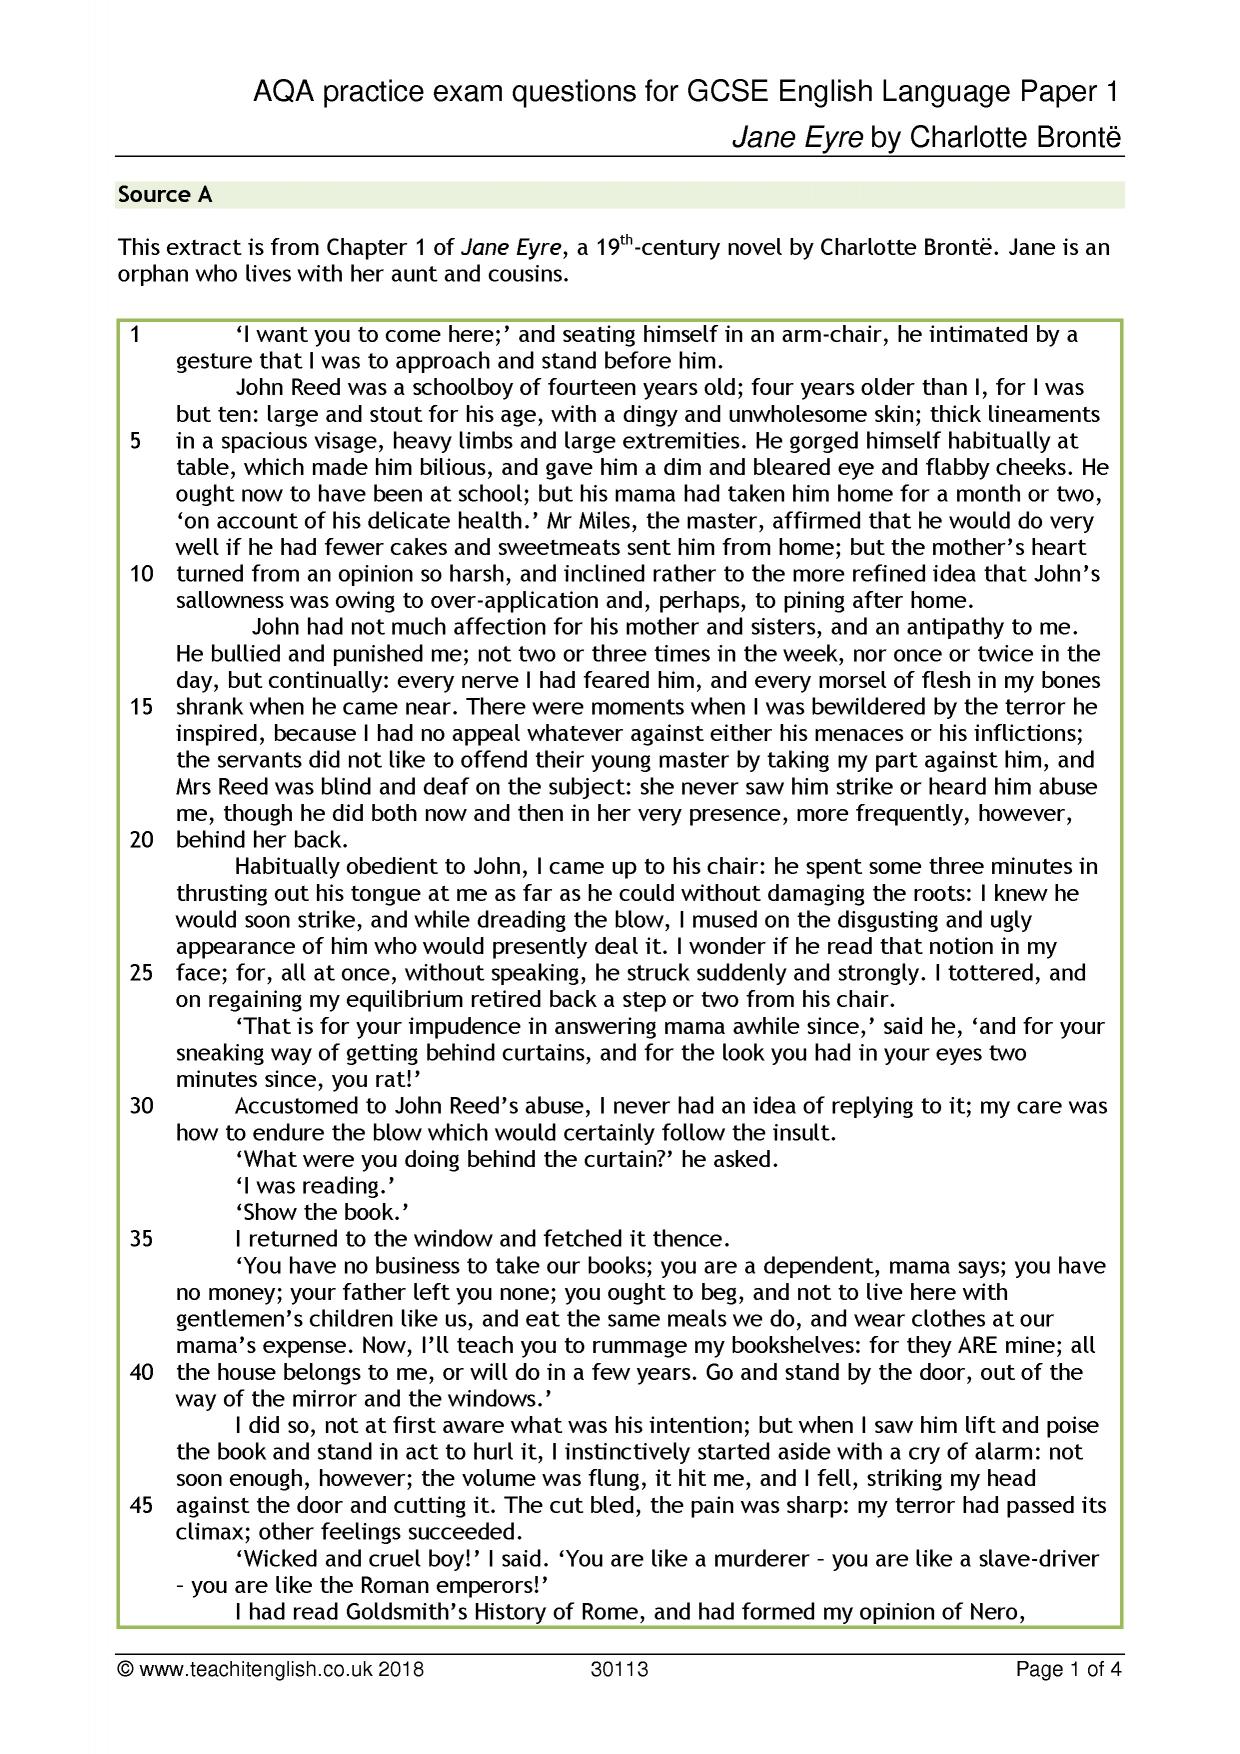 Aqa Language Paper 1 Question 5 Answers - Aqa English Language Paper 2 Section A Grade A Gender ...